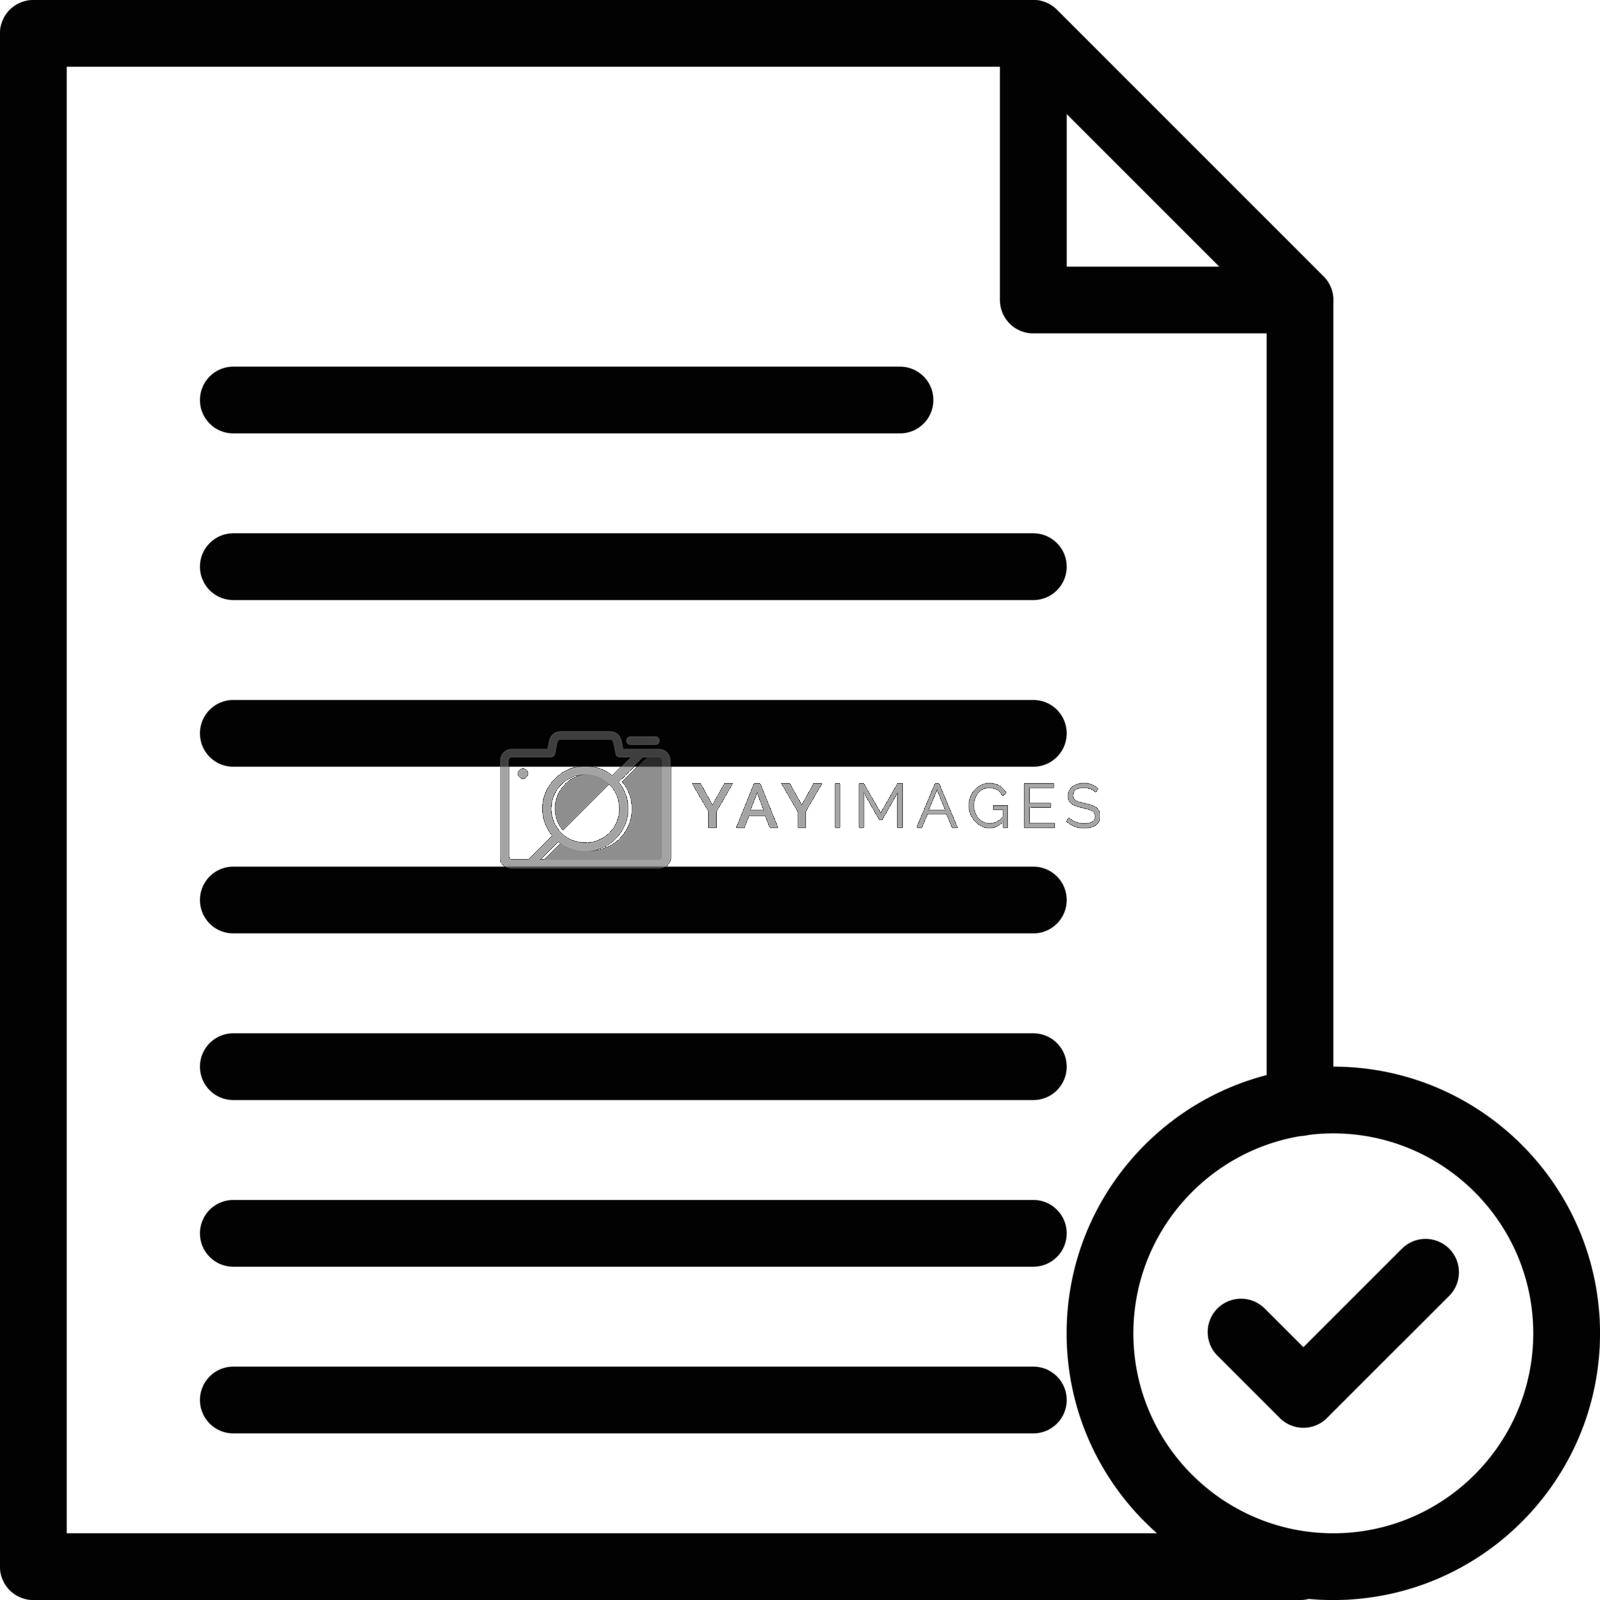 Royalty free image of document by FlaticonsDesign